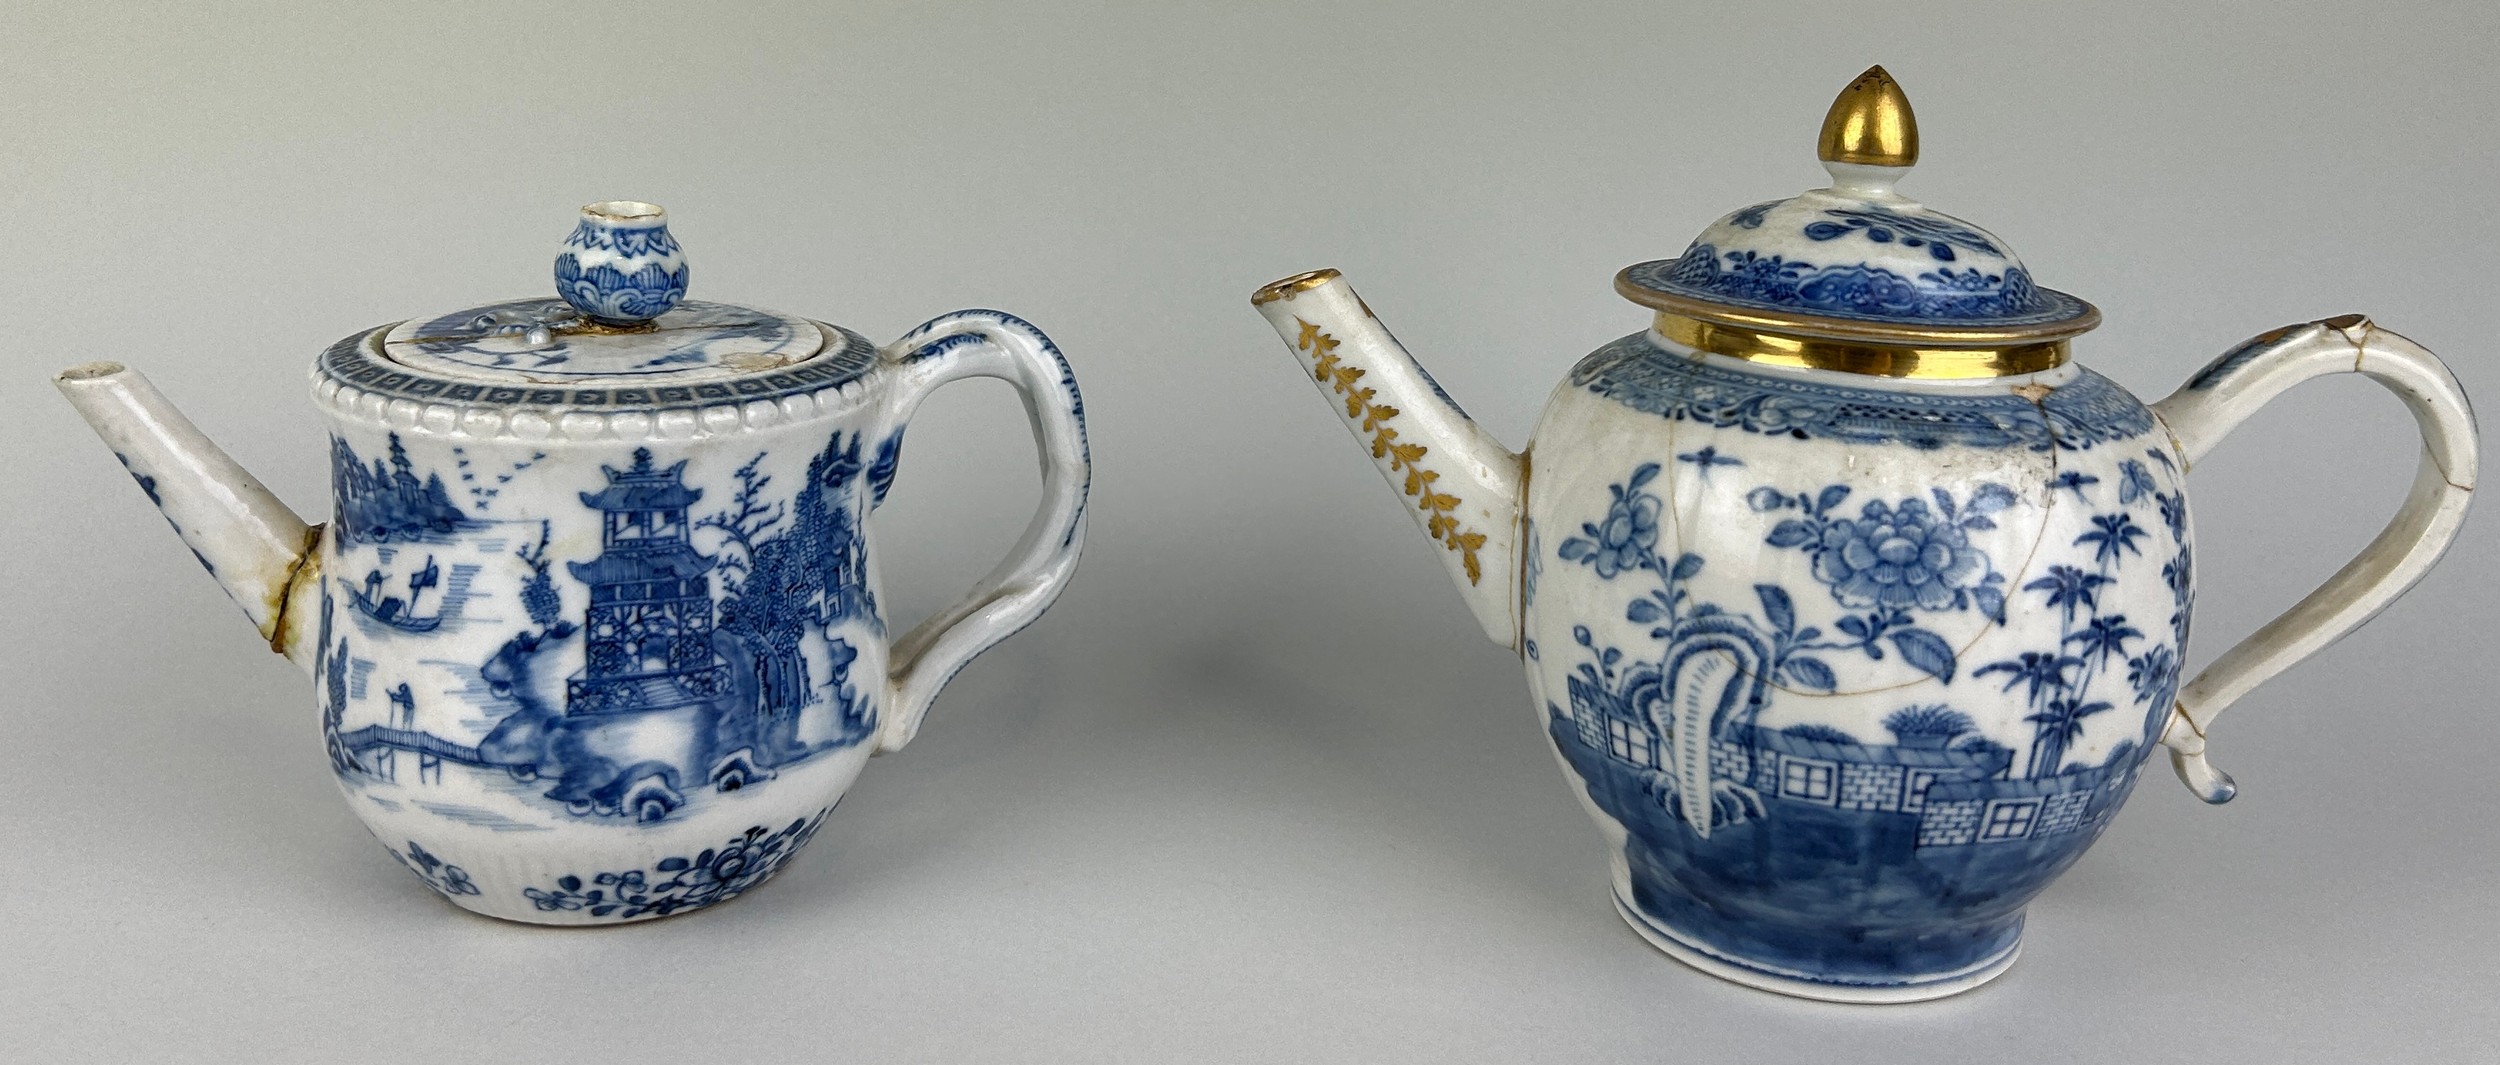 TWO CHINESE 18TH OR 19TH CENTURY TEA POTS, Largest 22cm x 12cm